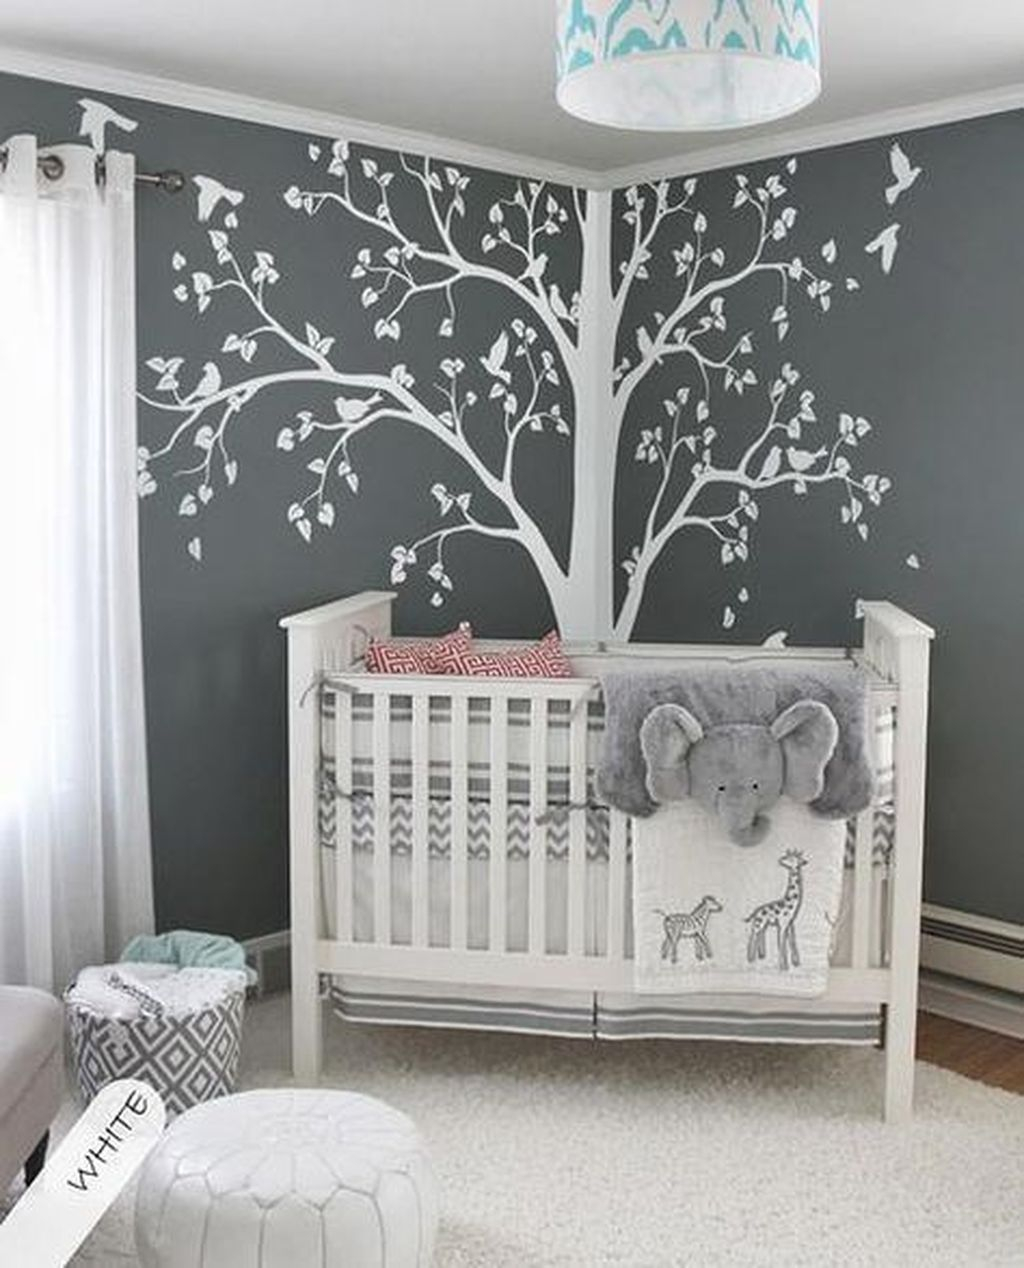 Cute And Cozy Bedroom Decor For Baby Girl26